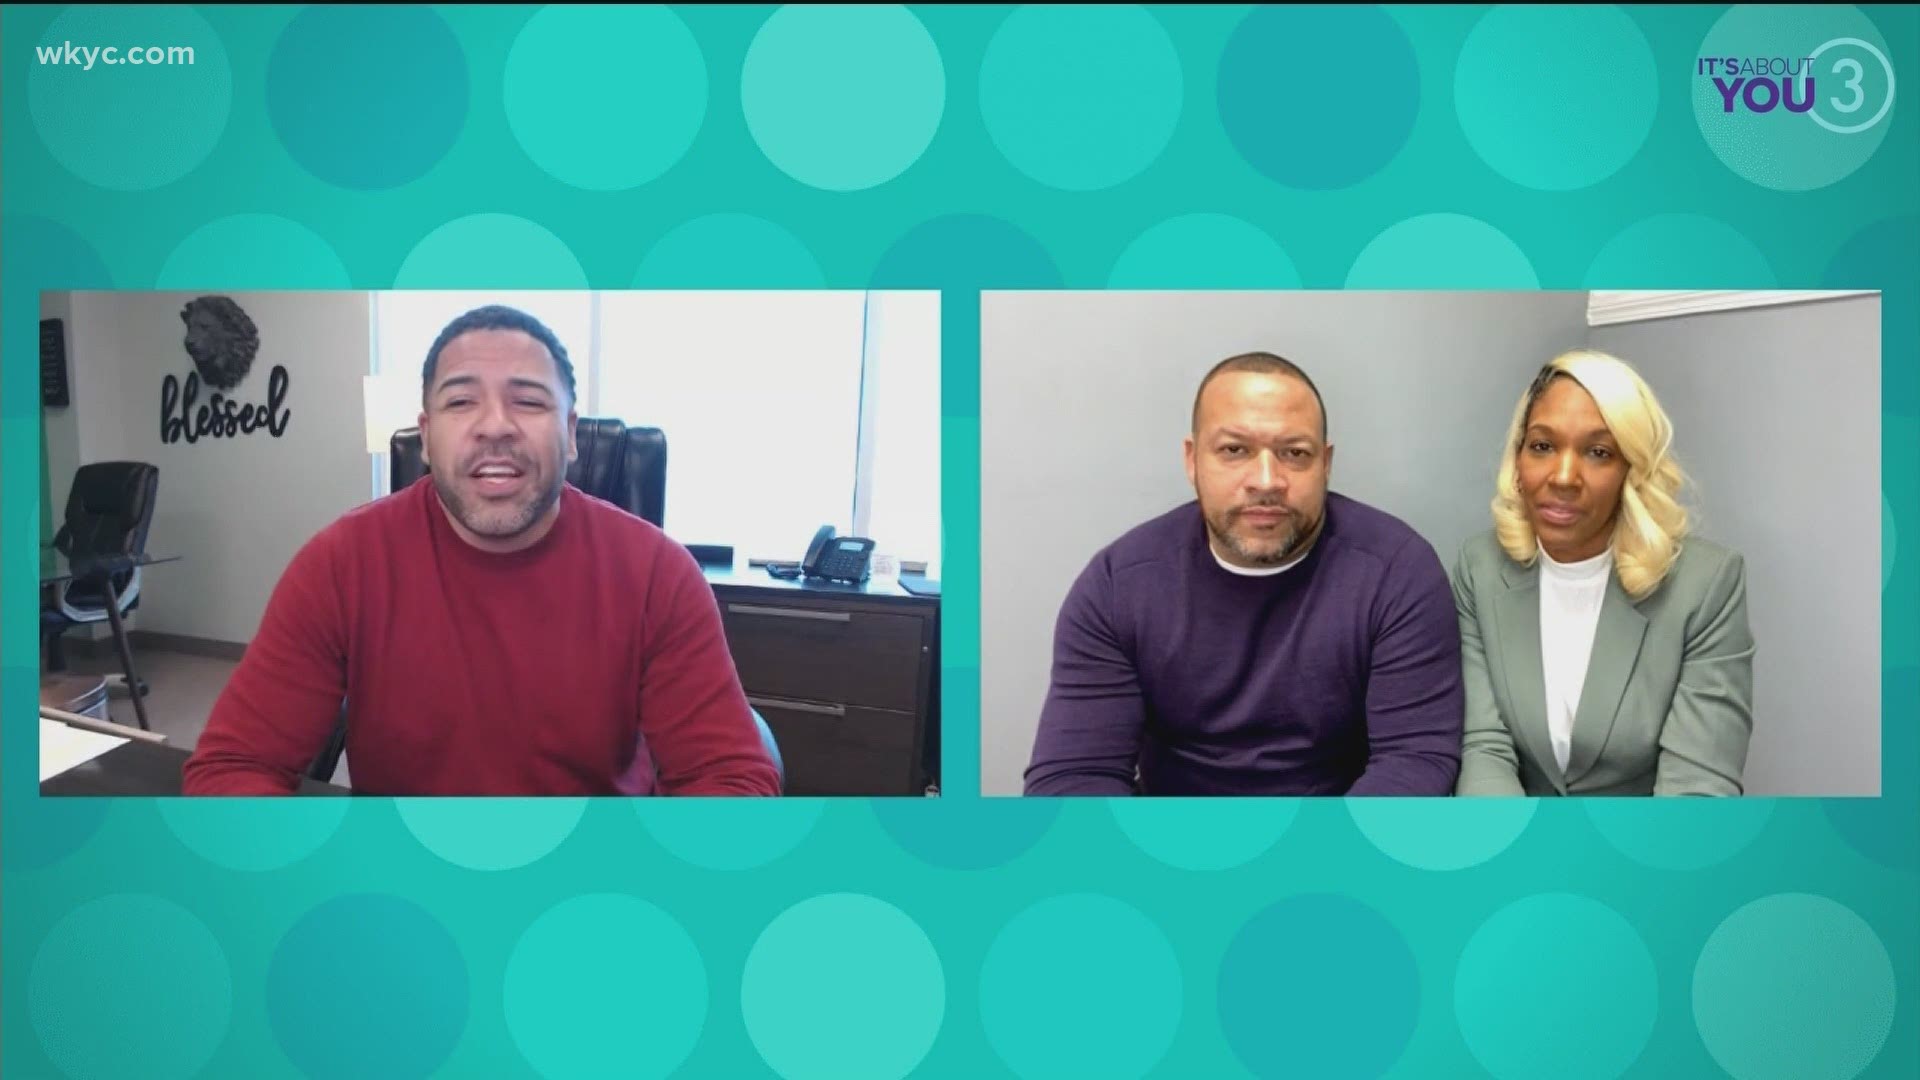 Larry is back with another segment of Everyday Champion and talks with Adrea and Mark Wilson about Brick House Realty and helping families move closer to their work.